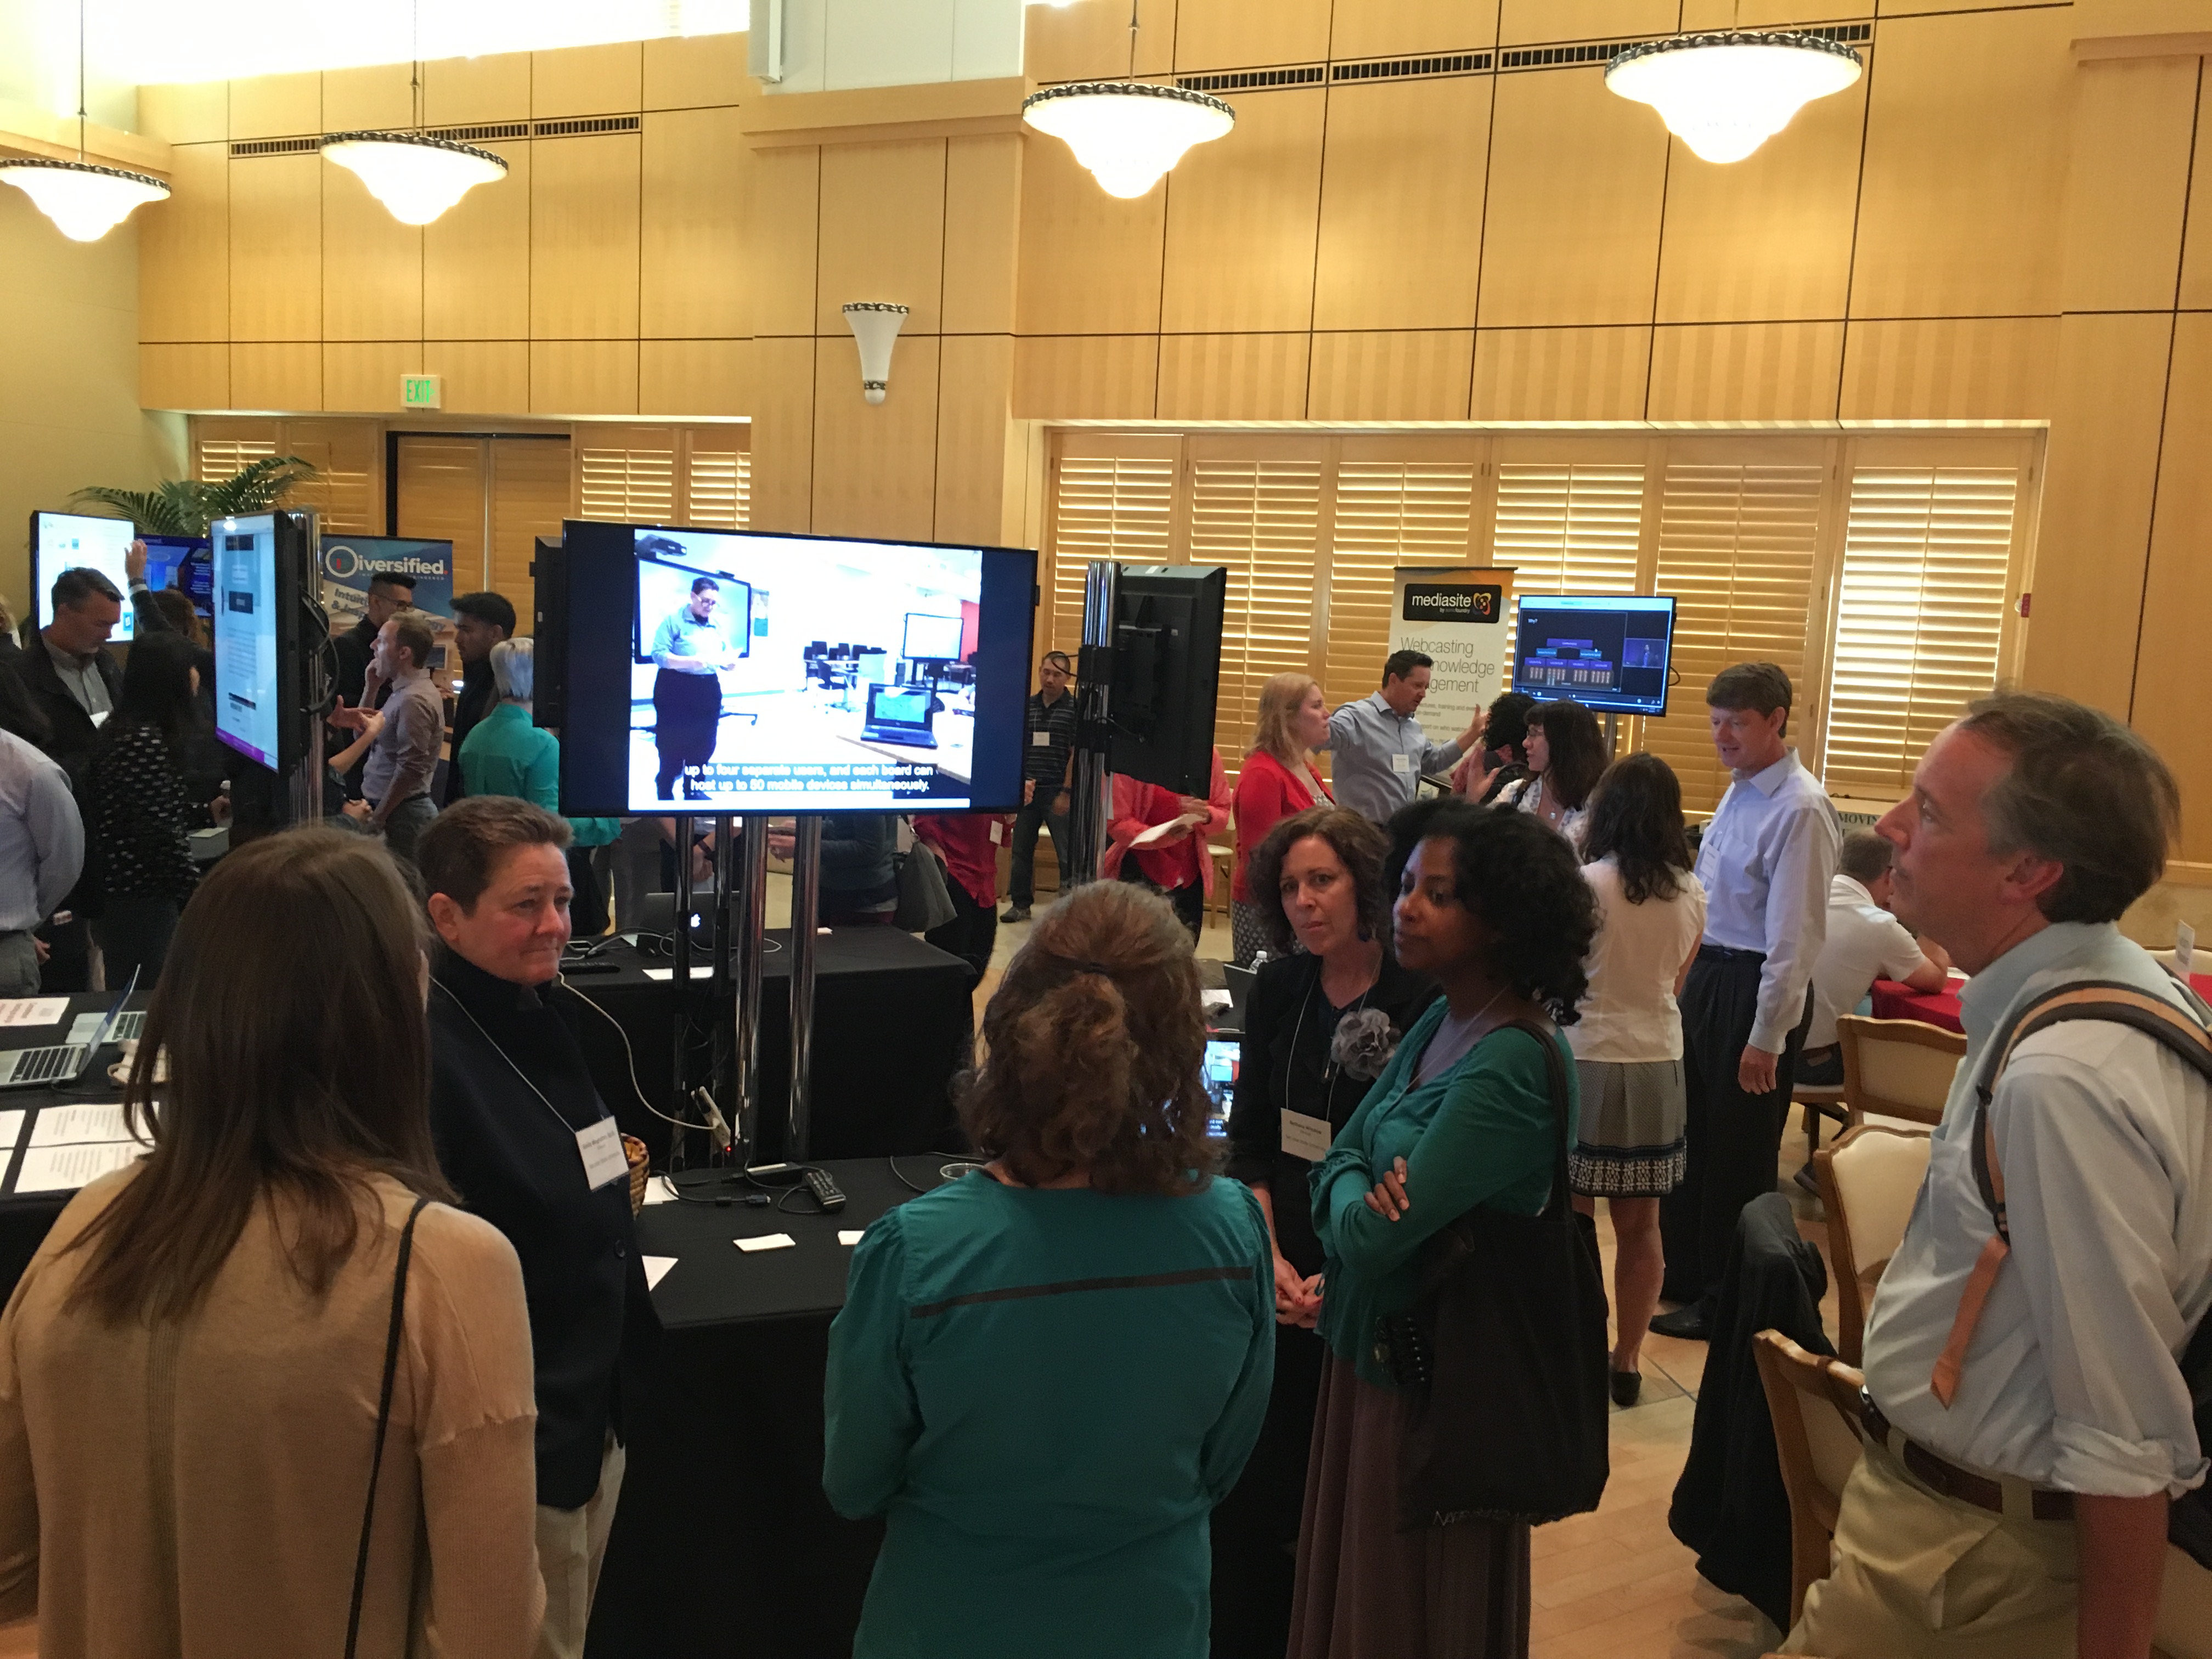 Emily Wughalter and colleagues presented a session on interactive display technology and teaching scholarly writing at the Academic Techology Expo on Oct. 2 at Stanford University. Photo: Klaus Trilck